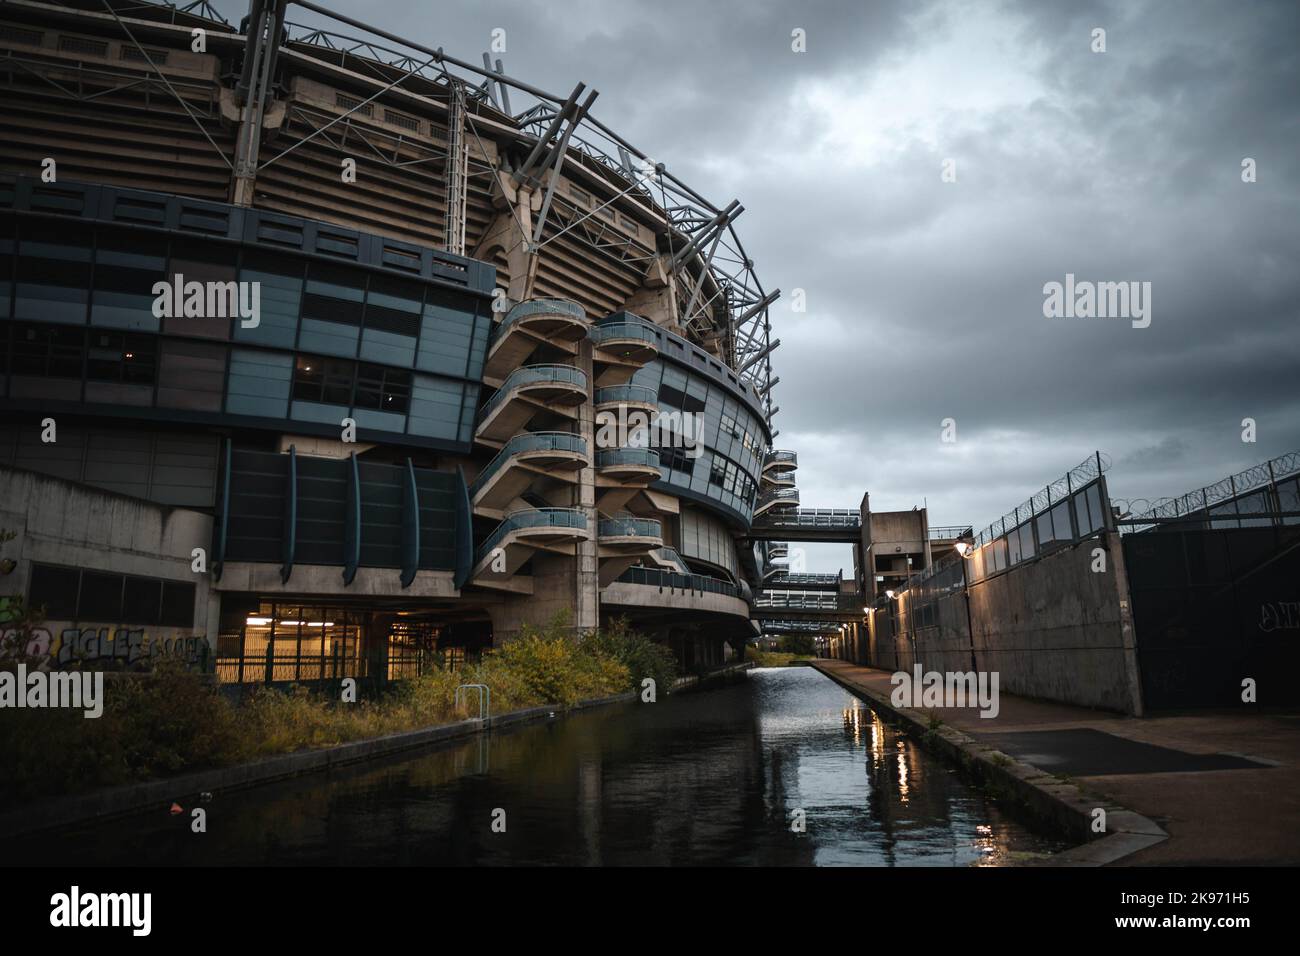 Image of the outside of Croke Park Stadium near Ryoal canal. Stock Photo